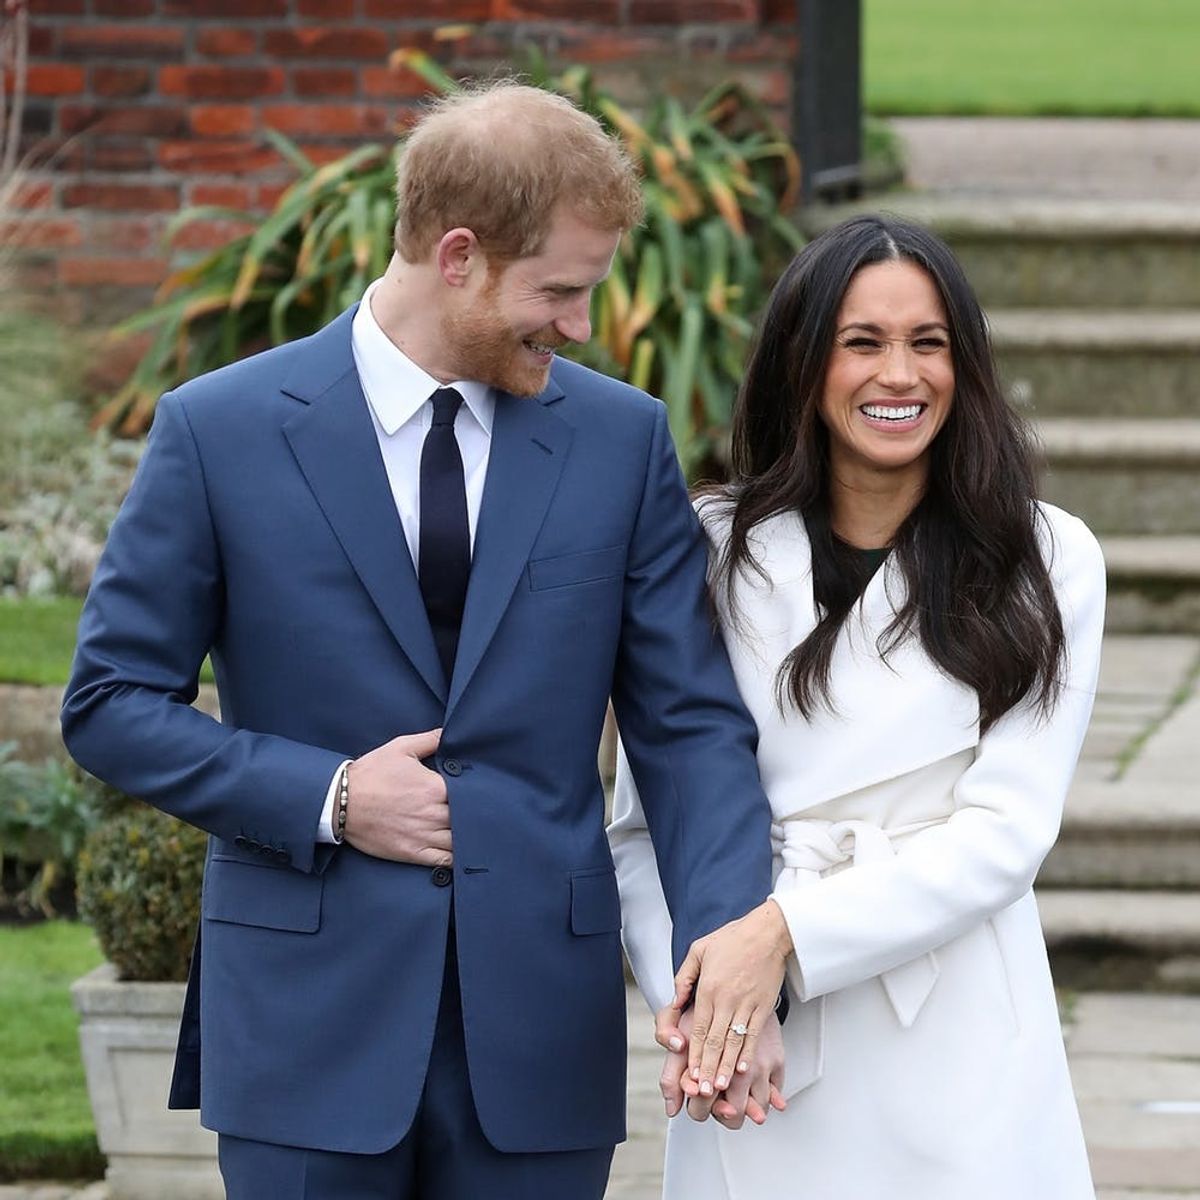 Meghan Markle May Break Yet Another Royal Tradition at Her Wedding to Prince Harry